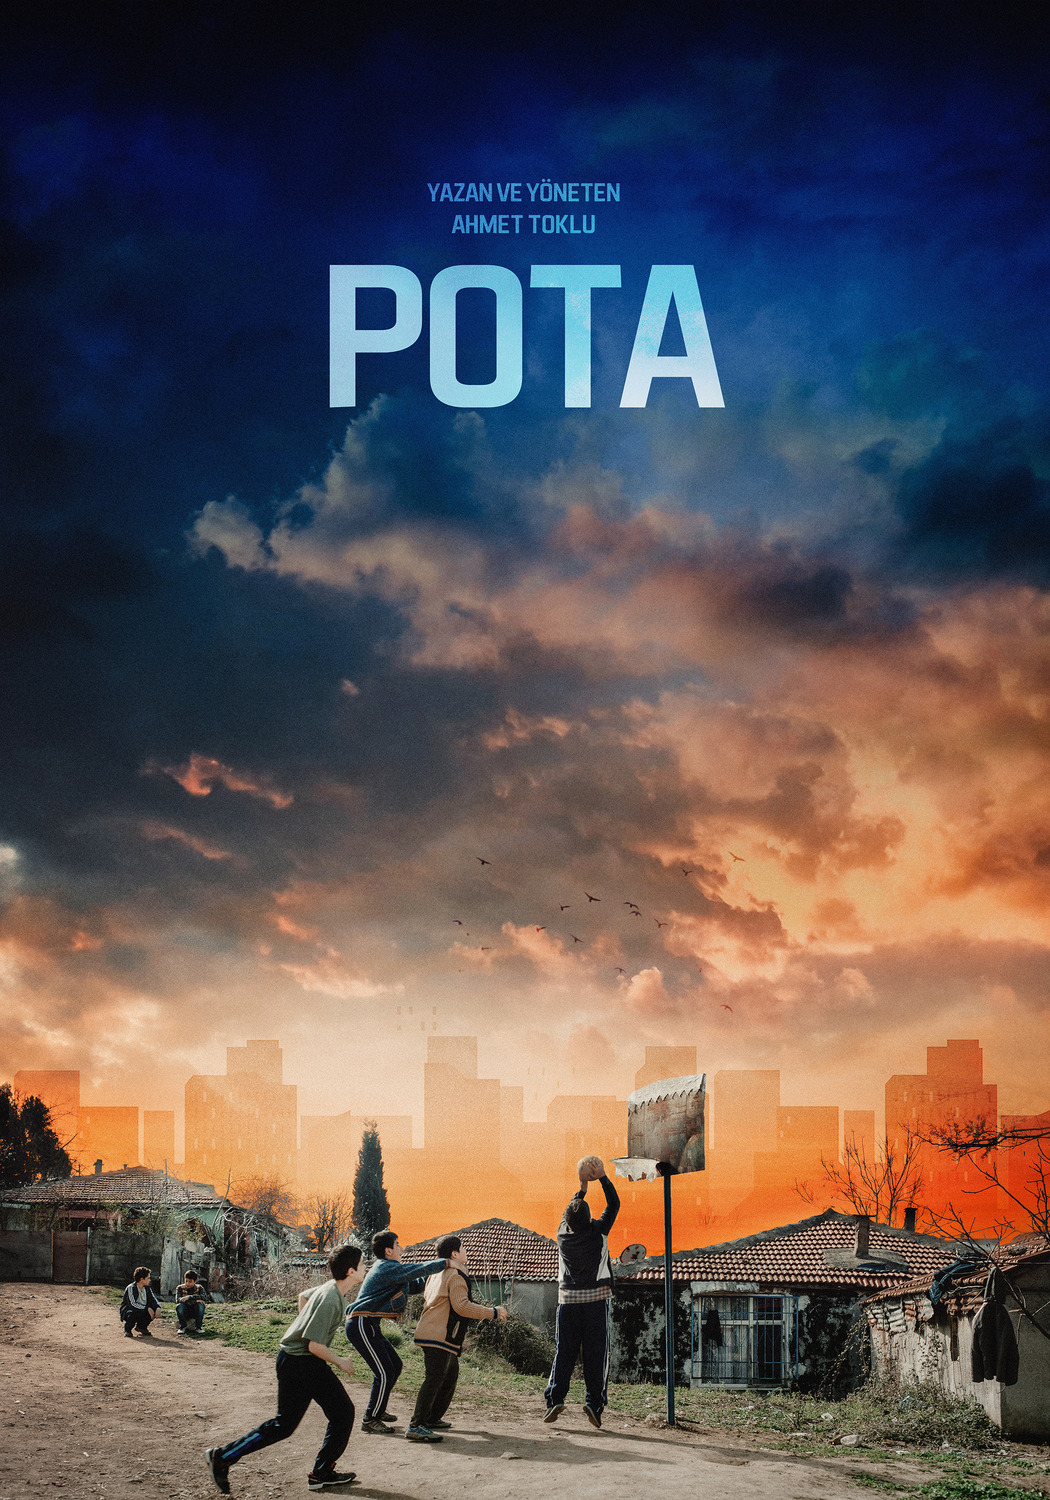 Extra Large Movie Poster Image for Pota (#11 of 11)